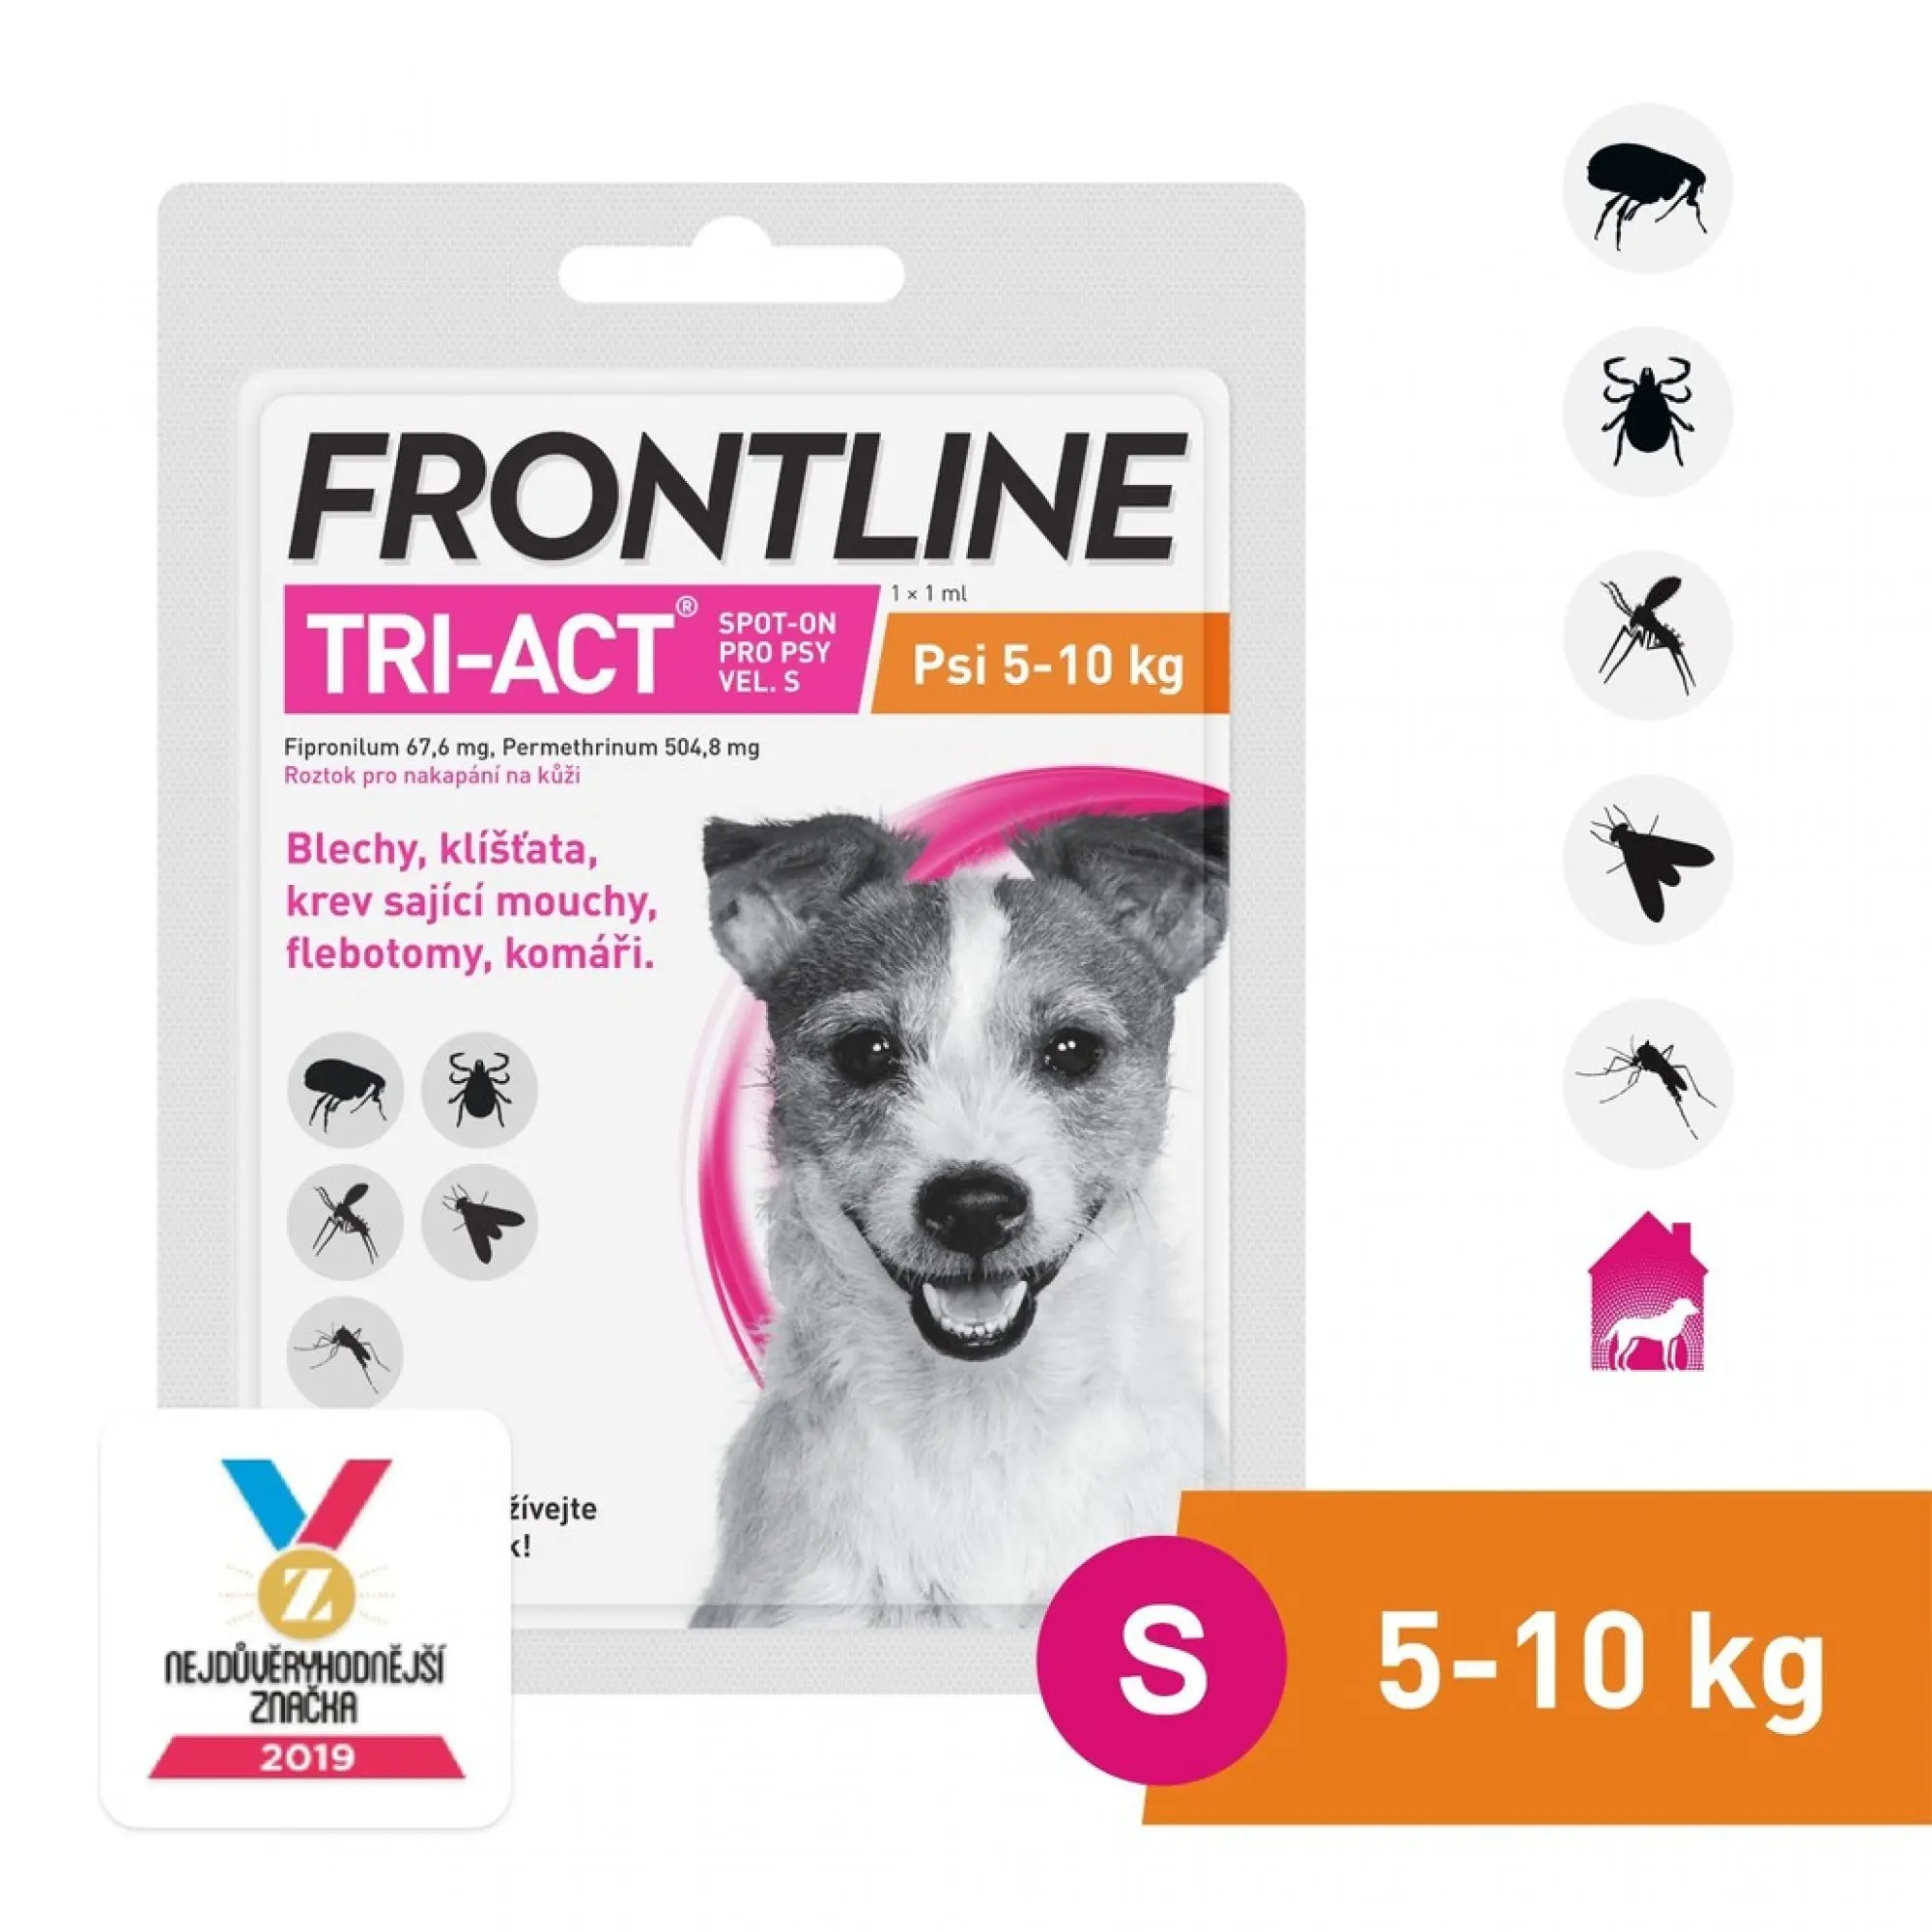 Frontline Tri-Act Spot-on pro psy S 5-10 kg 1 ml